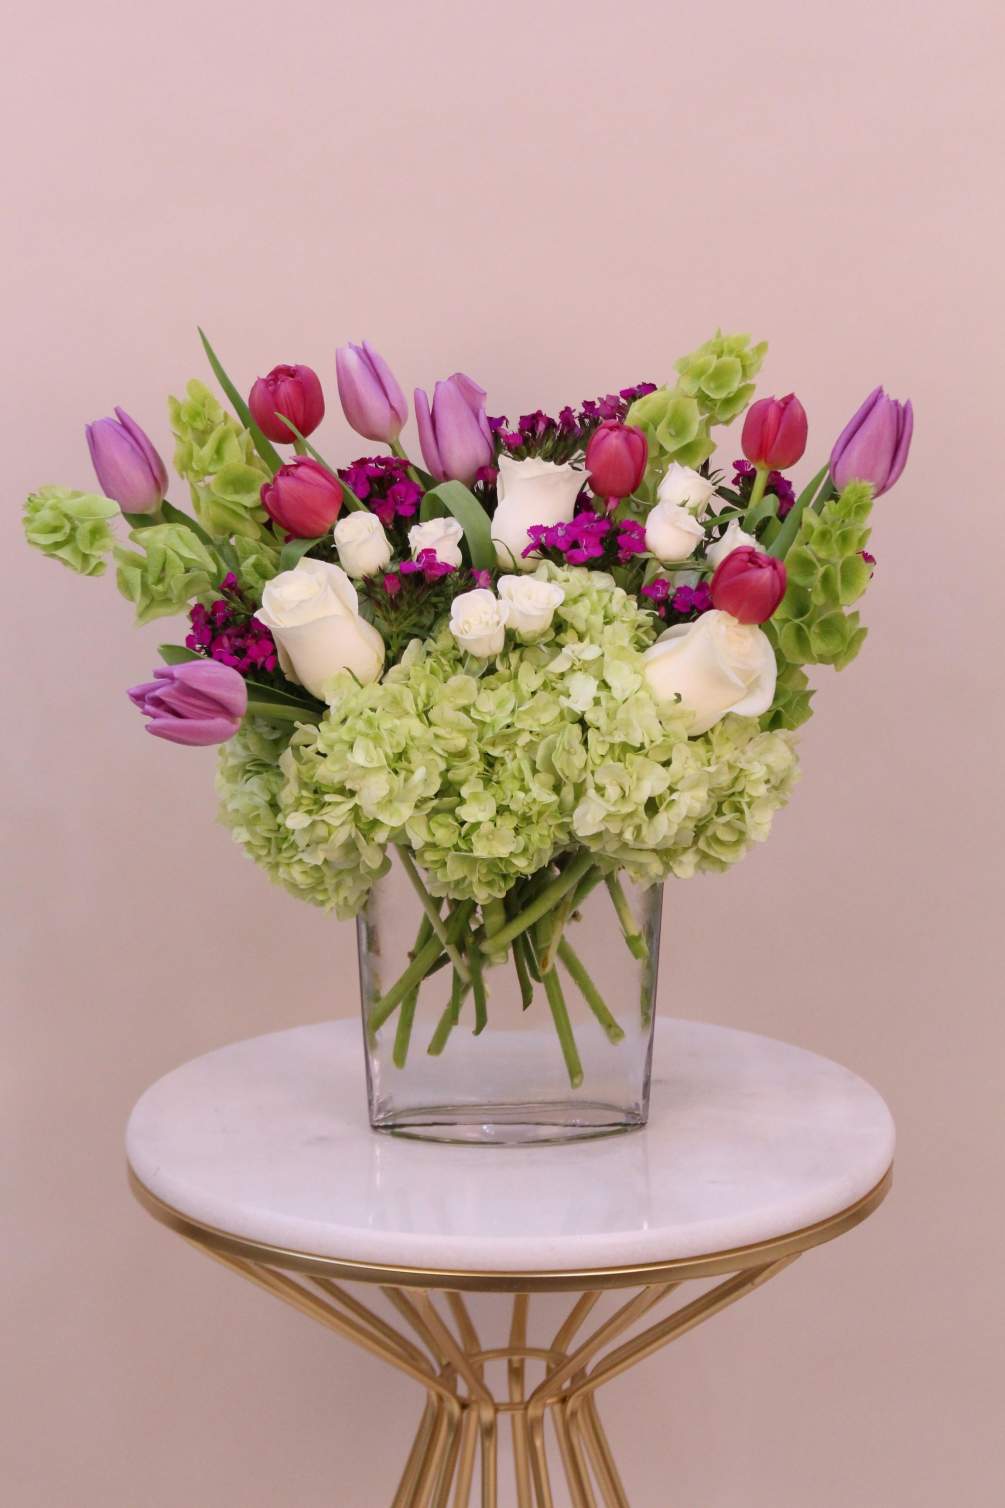 A lovely mix of spring flowers. May include roses, tulips, hydrangeas, spray